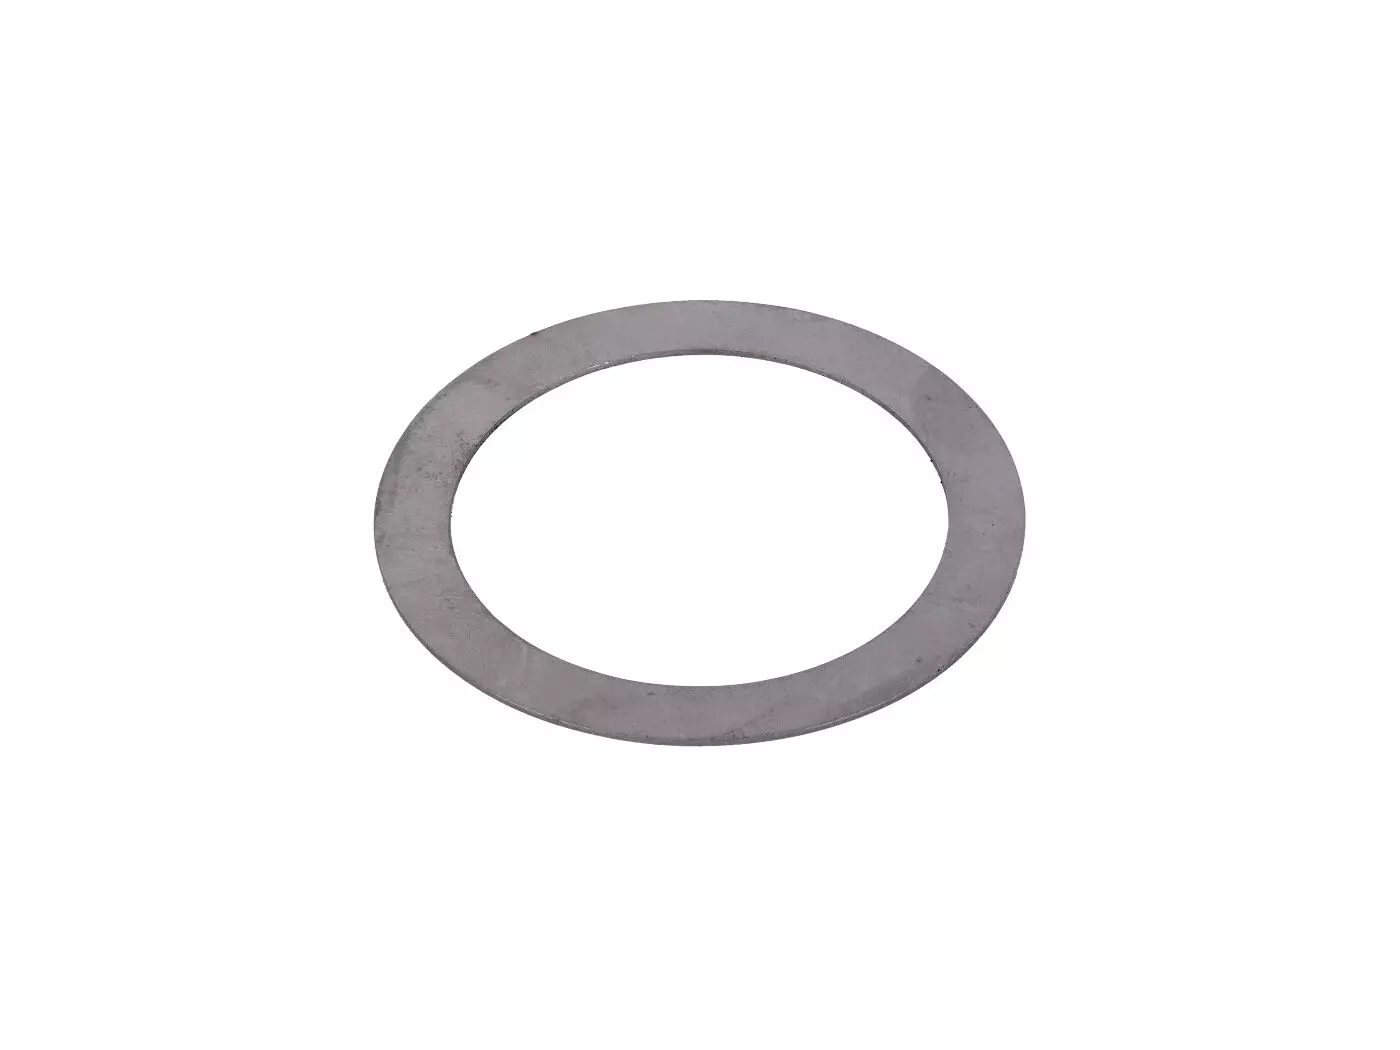 Drive Shaft Sealing Cap Spacer Disc 32x42x0.2mm For Simson S50, S51, S53, S70, S83, SR50, SR80, KR51, KR51/1, KR51/2, SR4-1, SR4-2, SR4-3, SR4-4